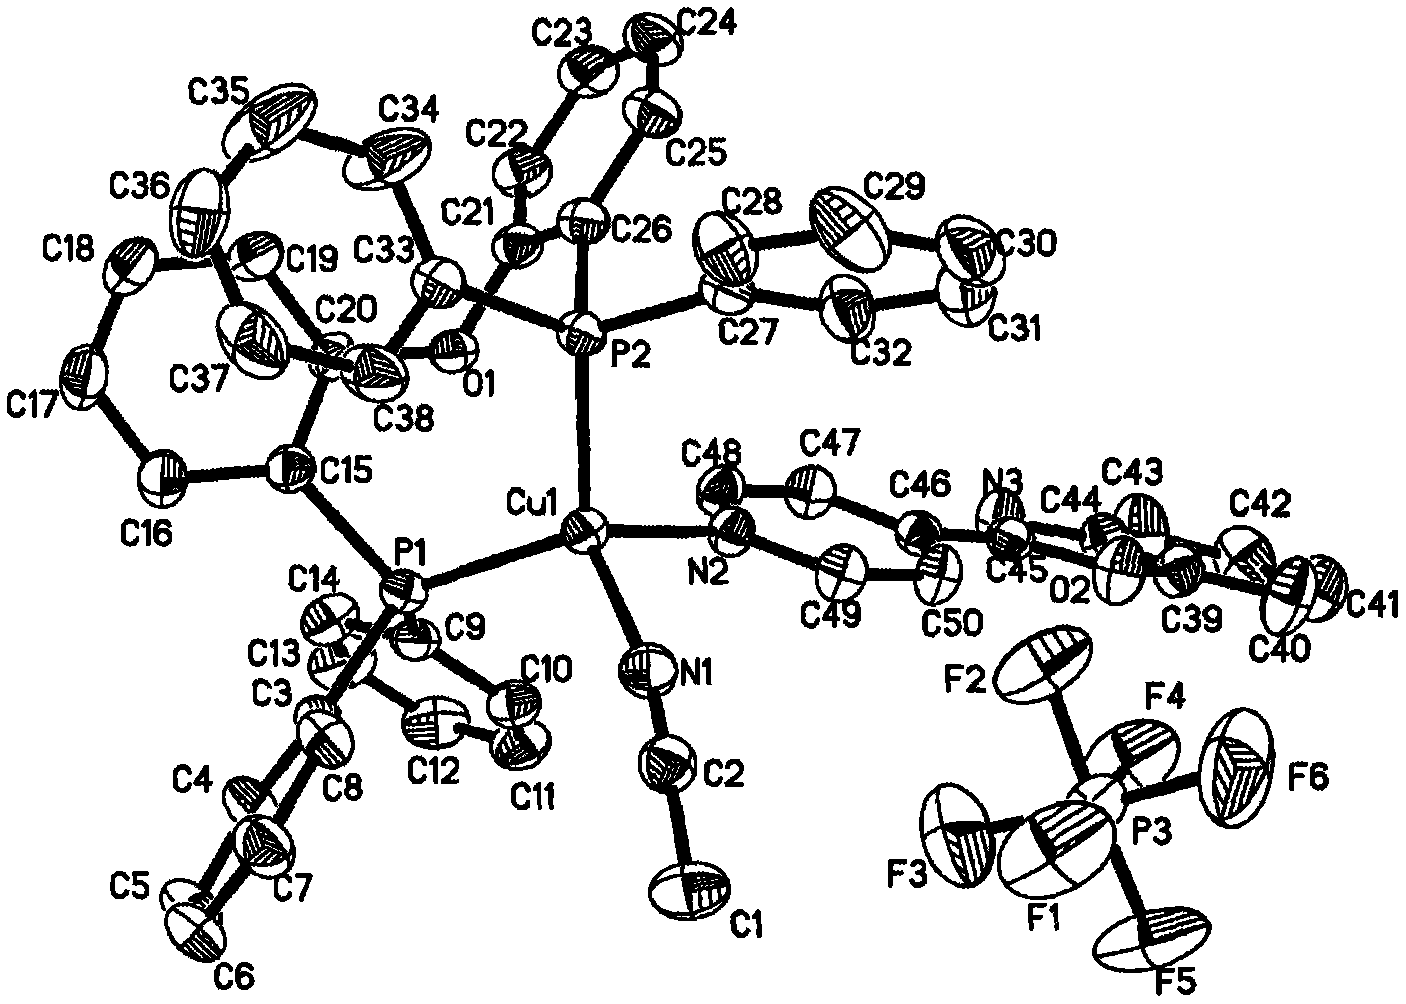 Tetrahedral cuprous complex luminescent material containing oxazolyl pyridine ligands